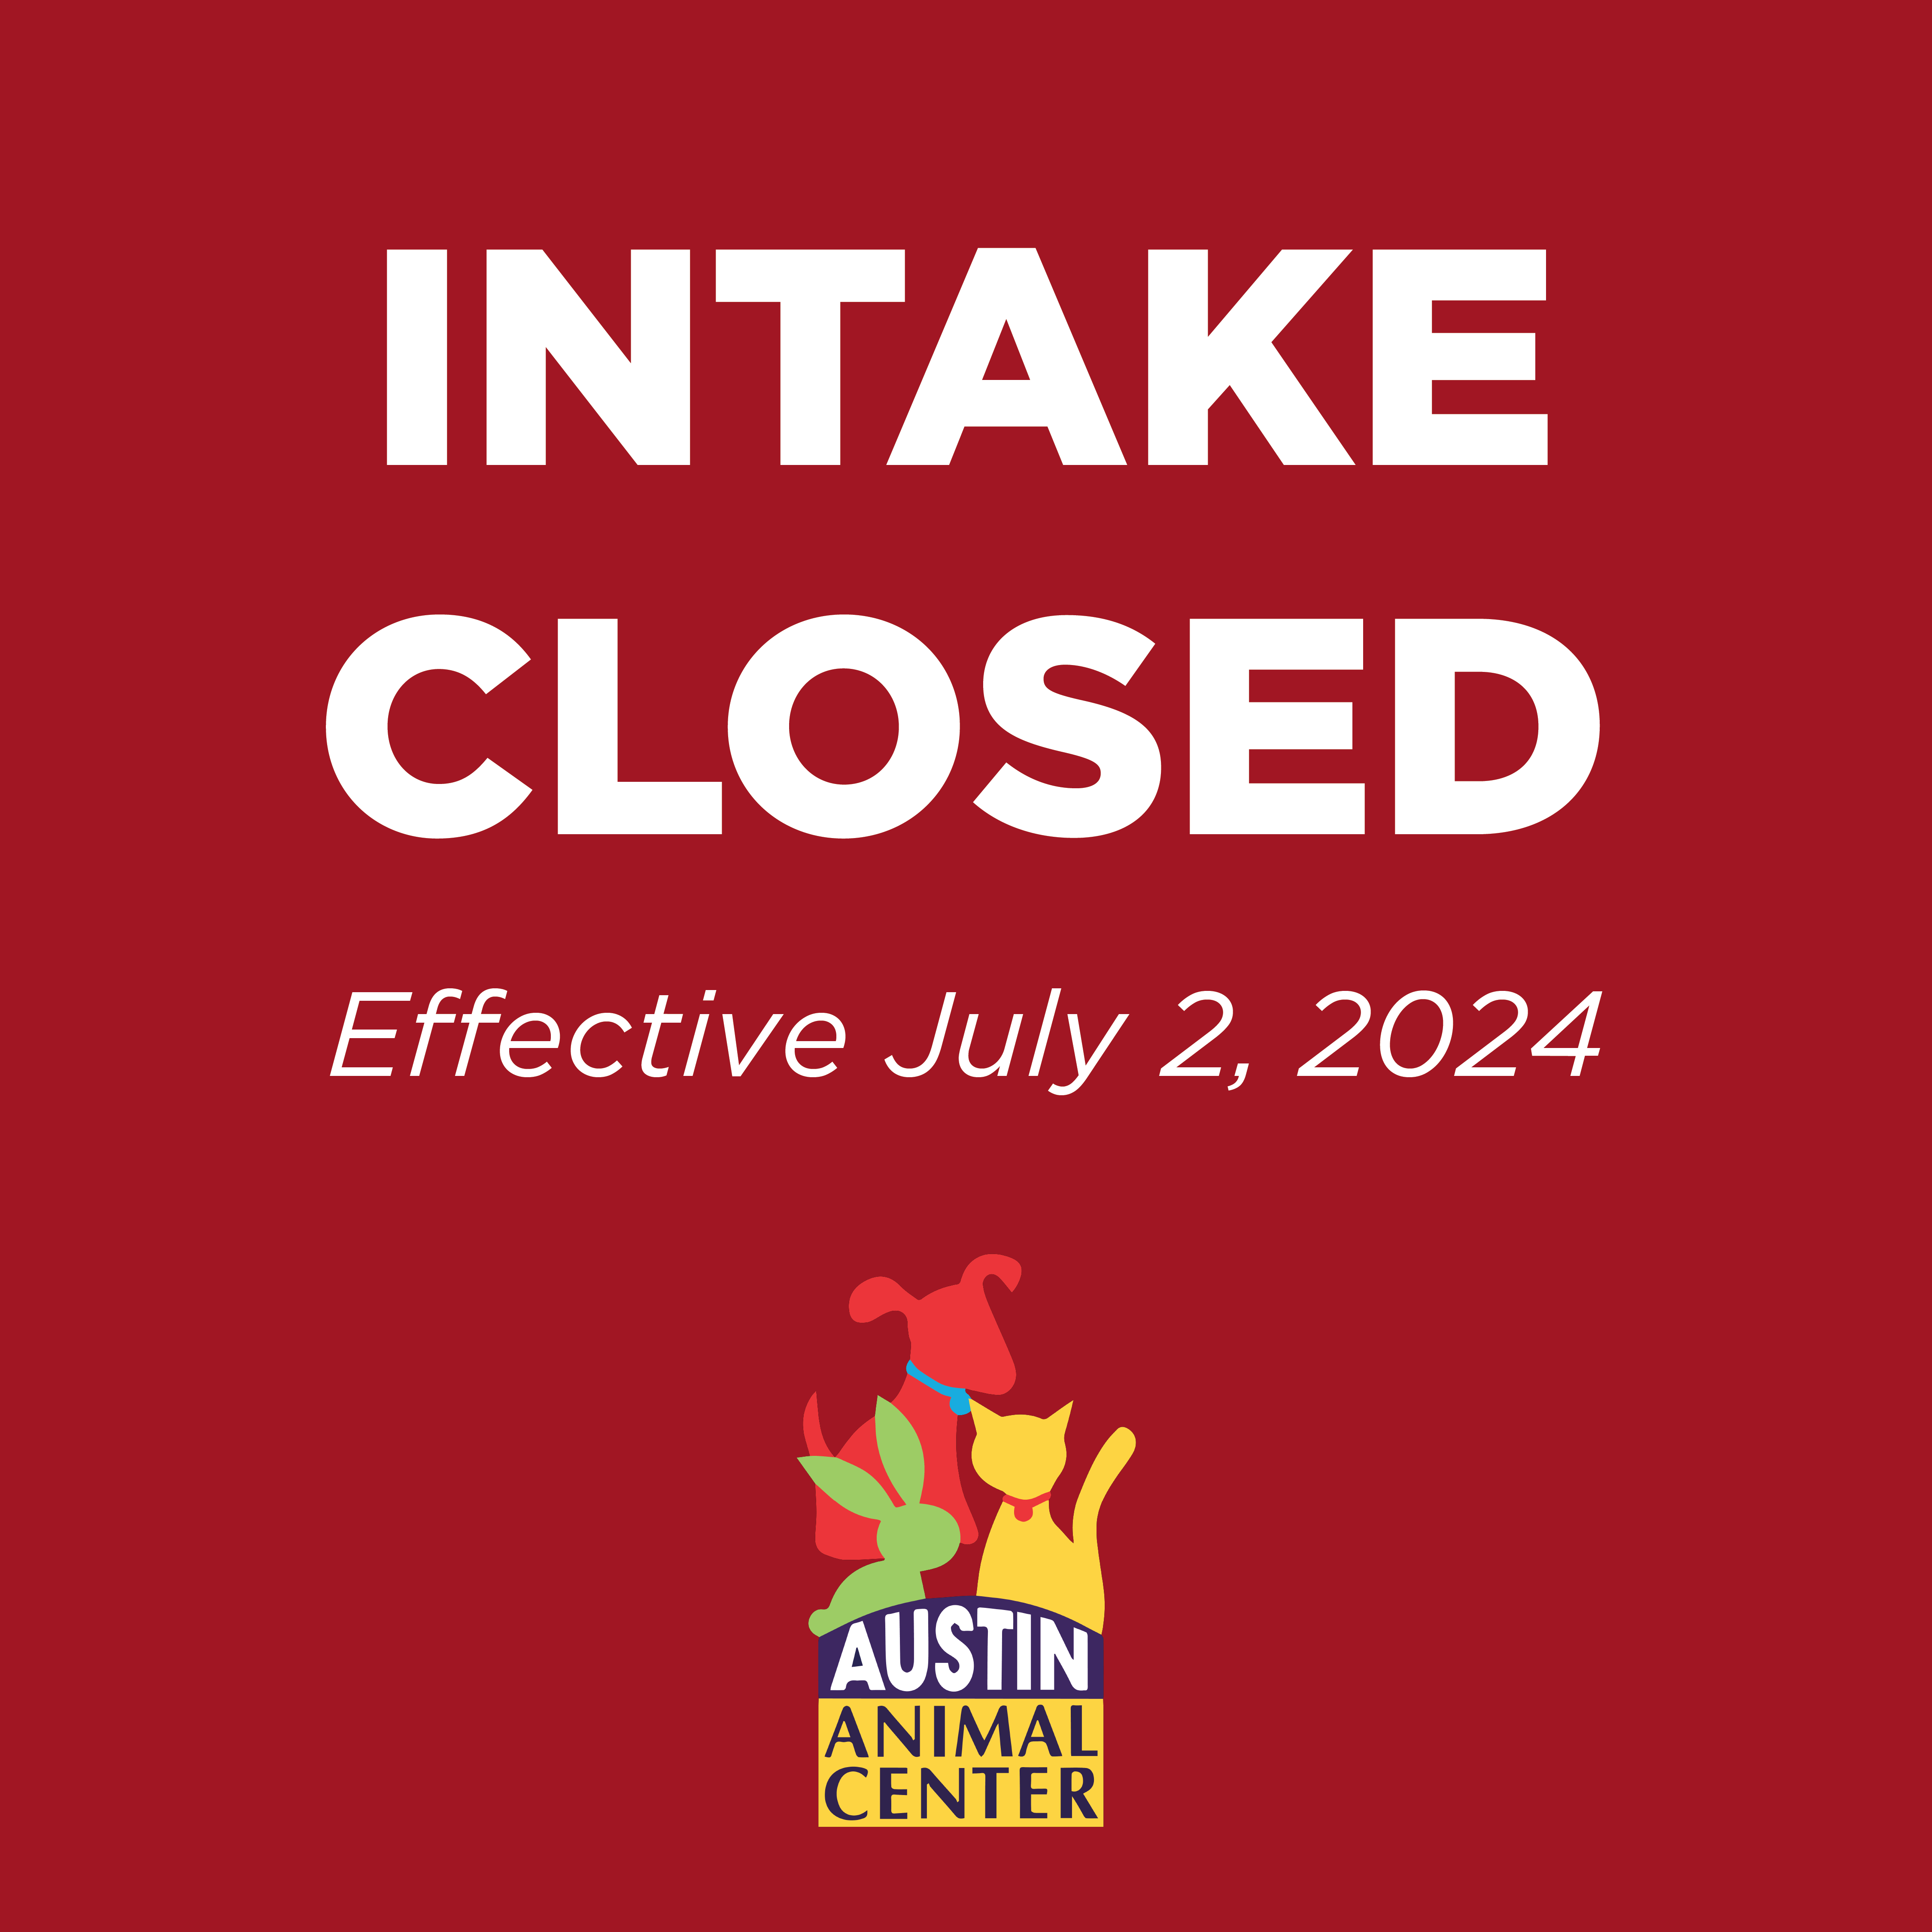 Intake closed effective July 2, 2024